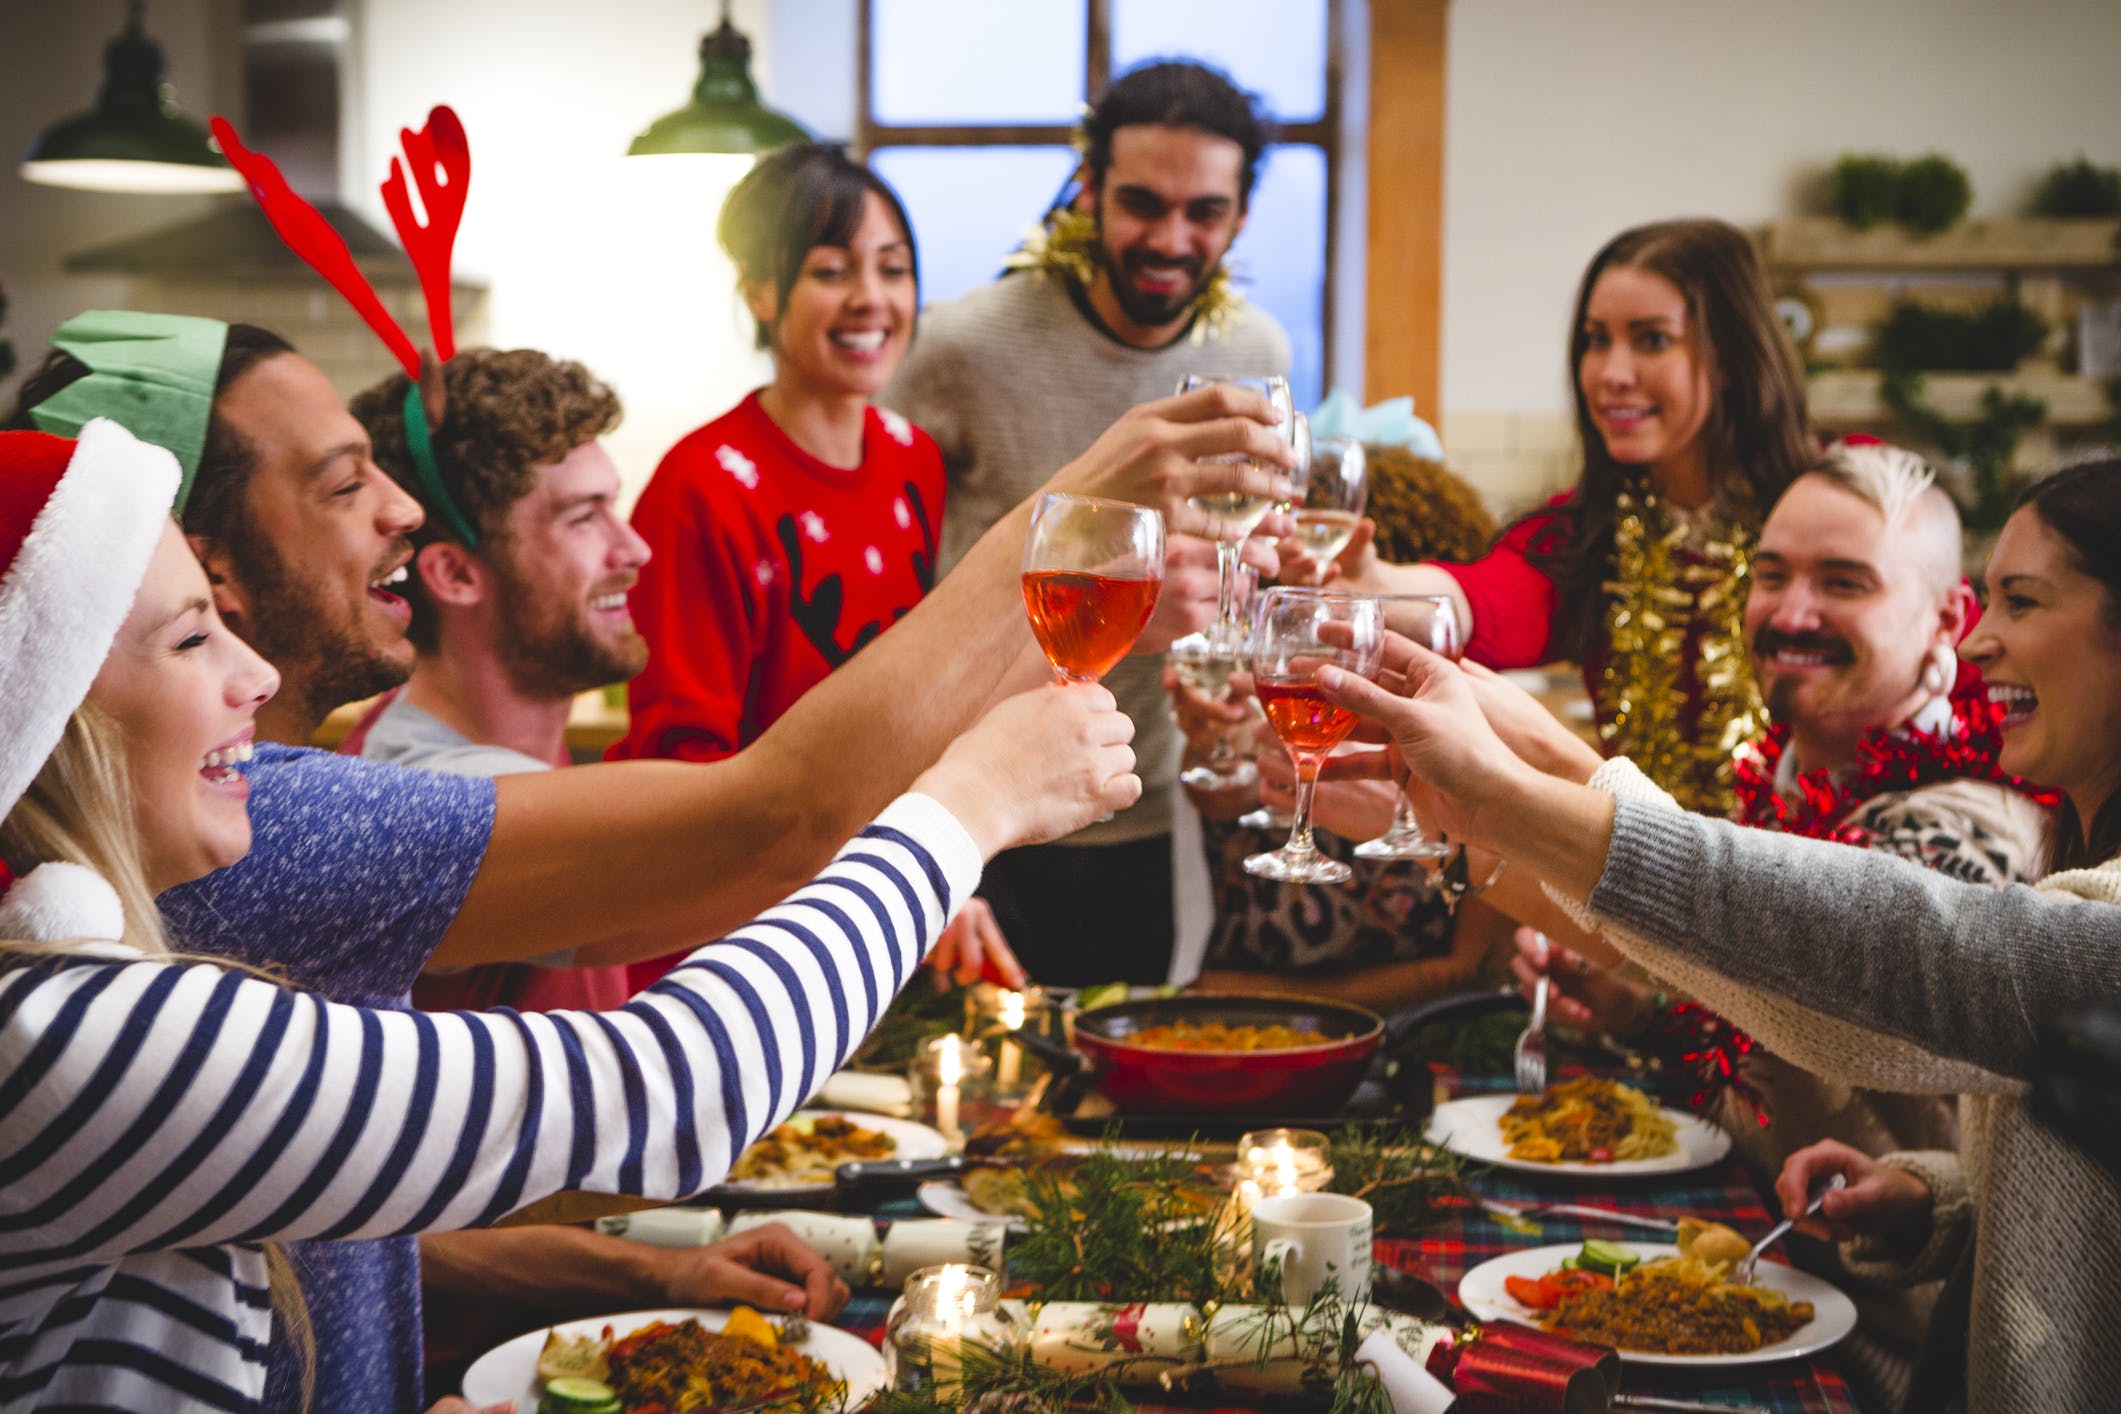 Serving Up Better Choices for Diabetics During the Holidays